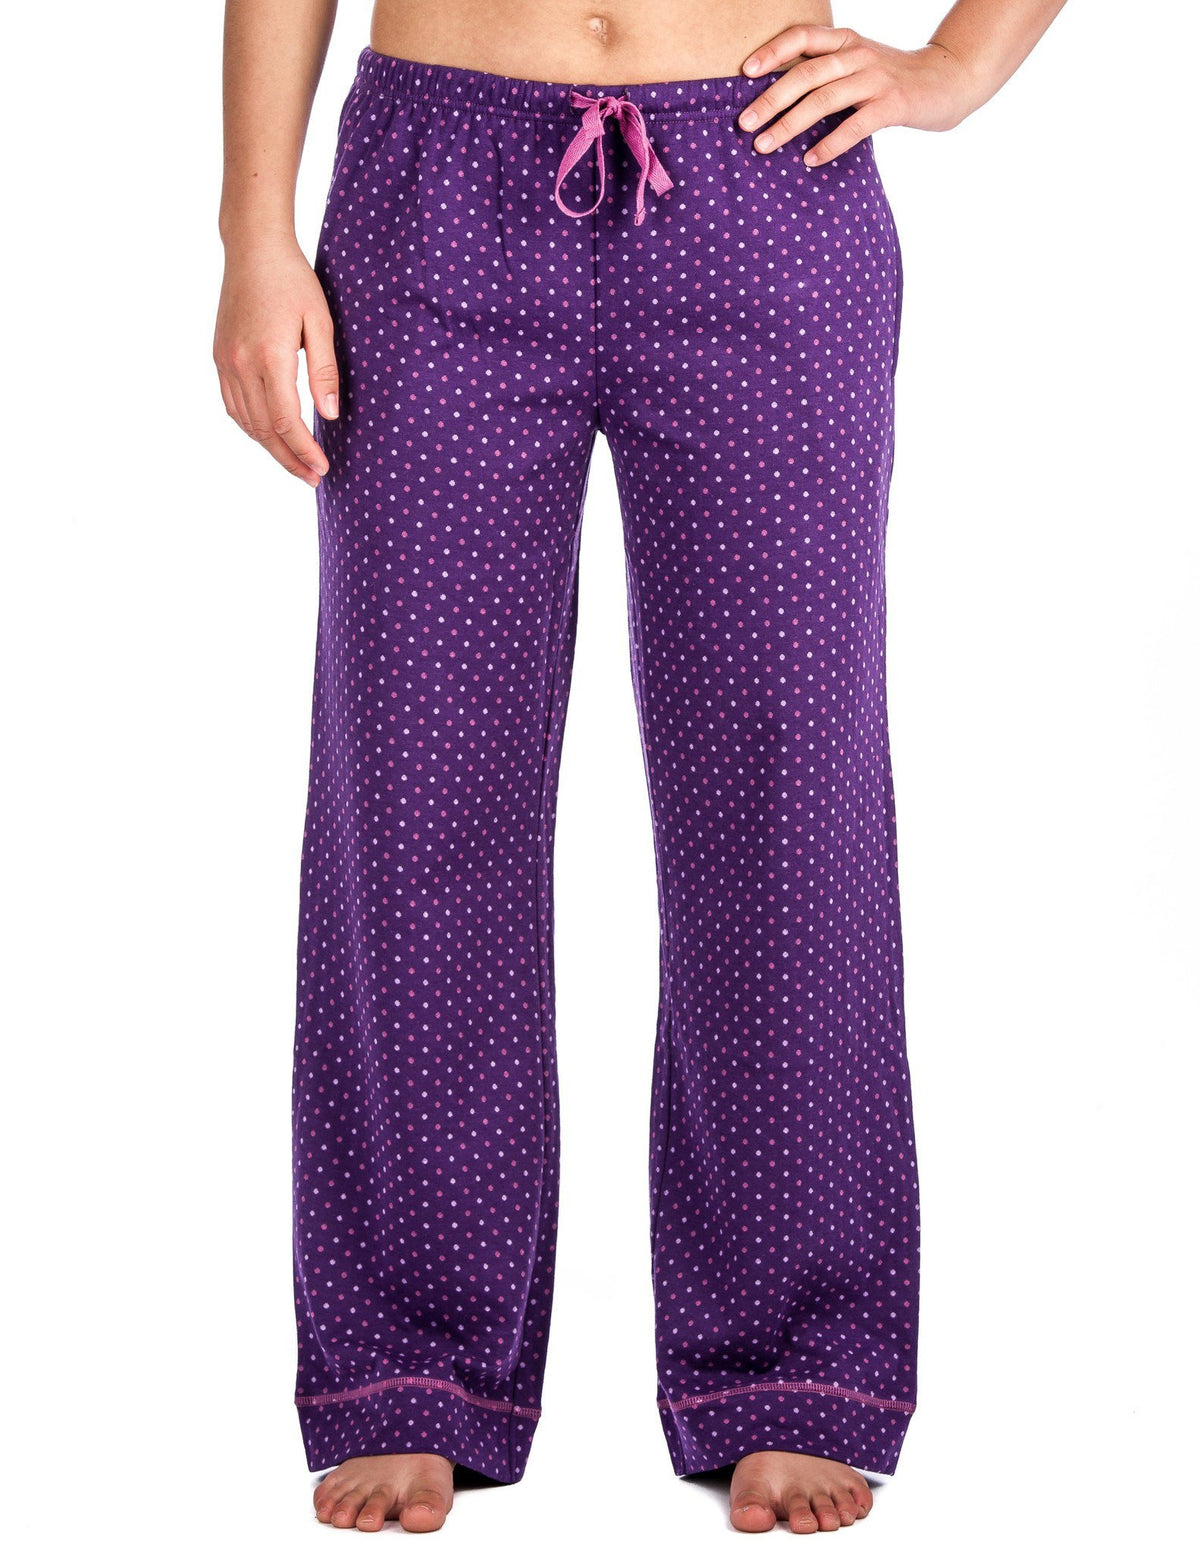 Women's Double Layer Knit Jersey Lounge Pants - Polka Dots - Purple (Relaxed Fit)